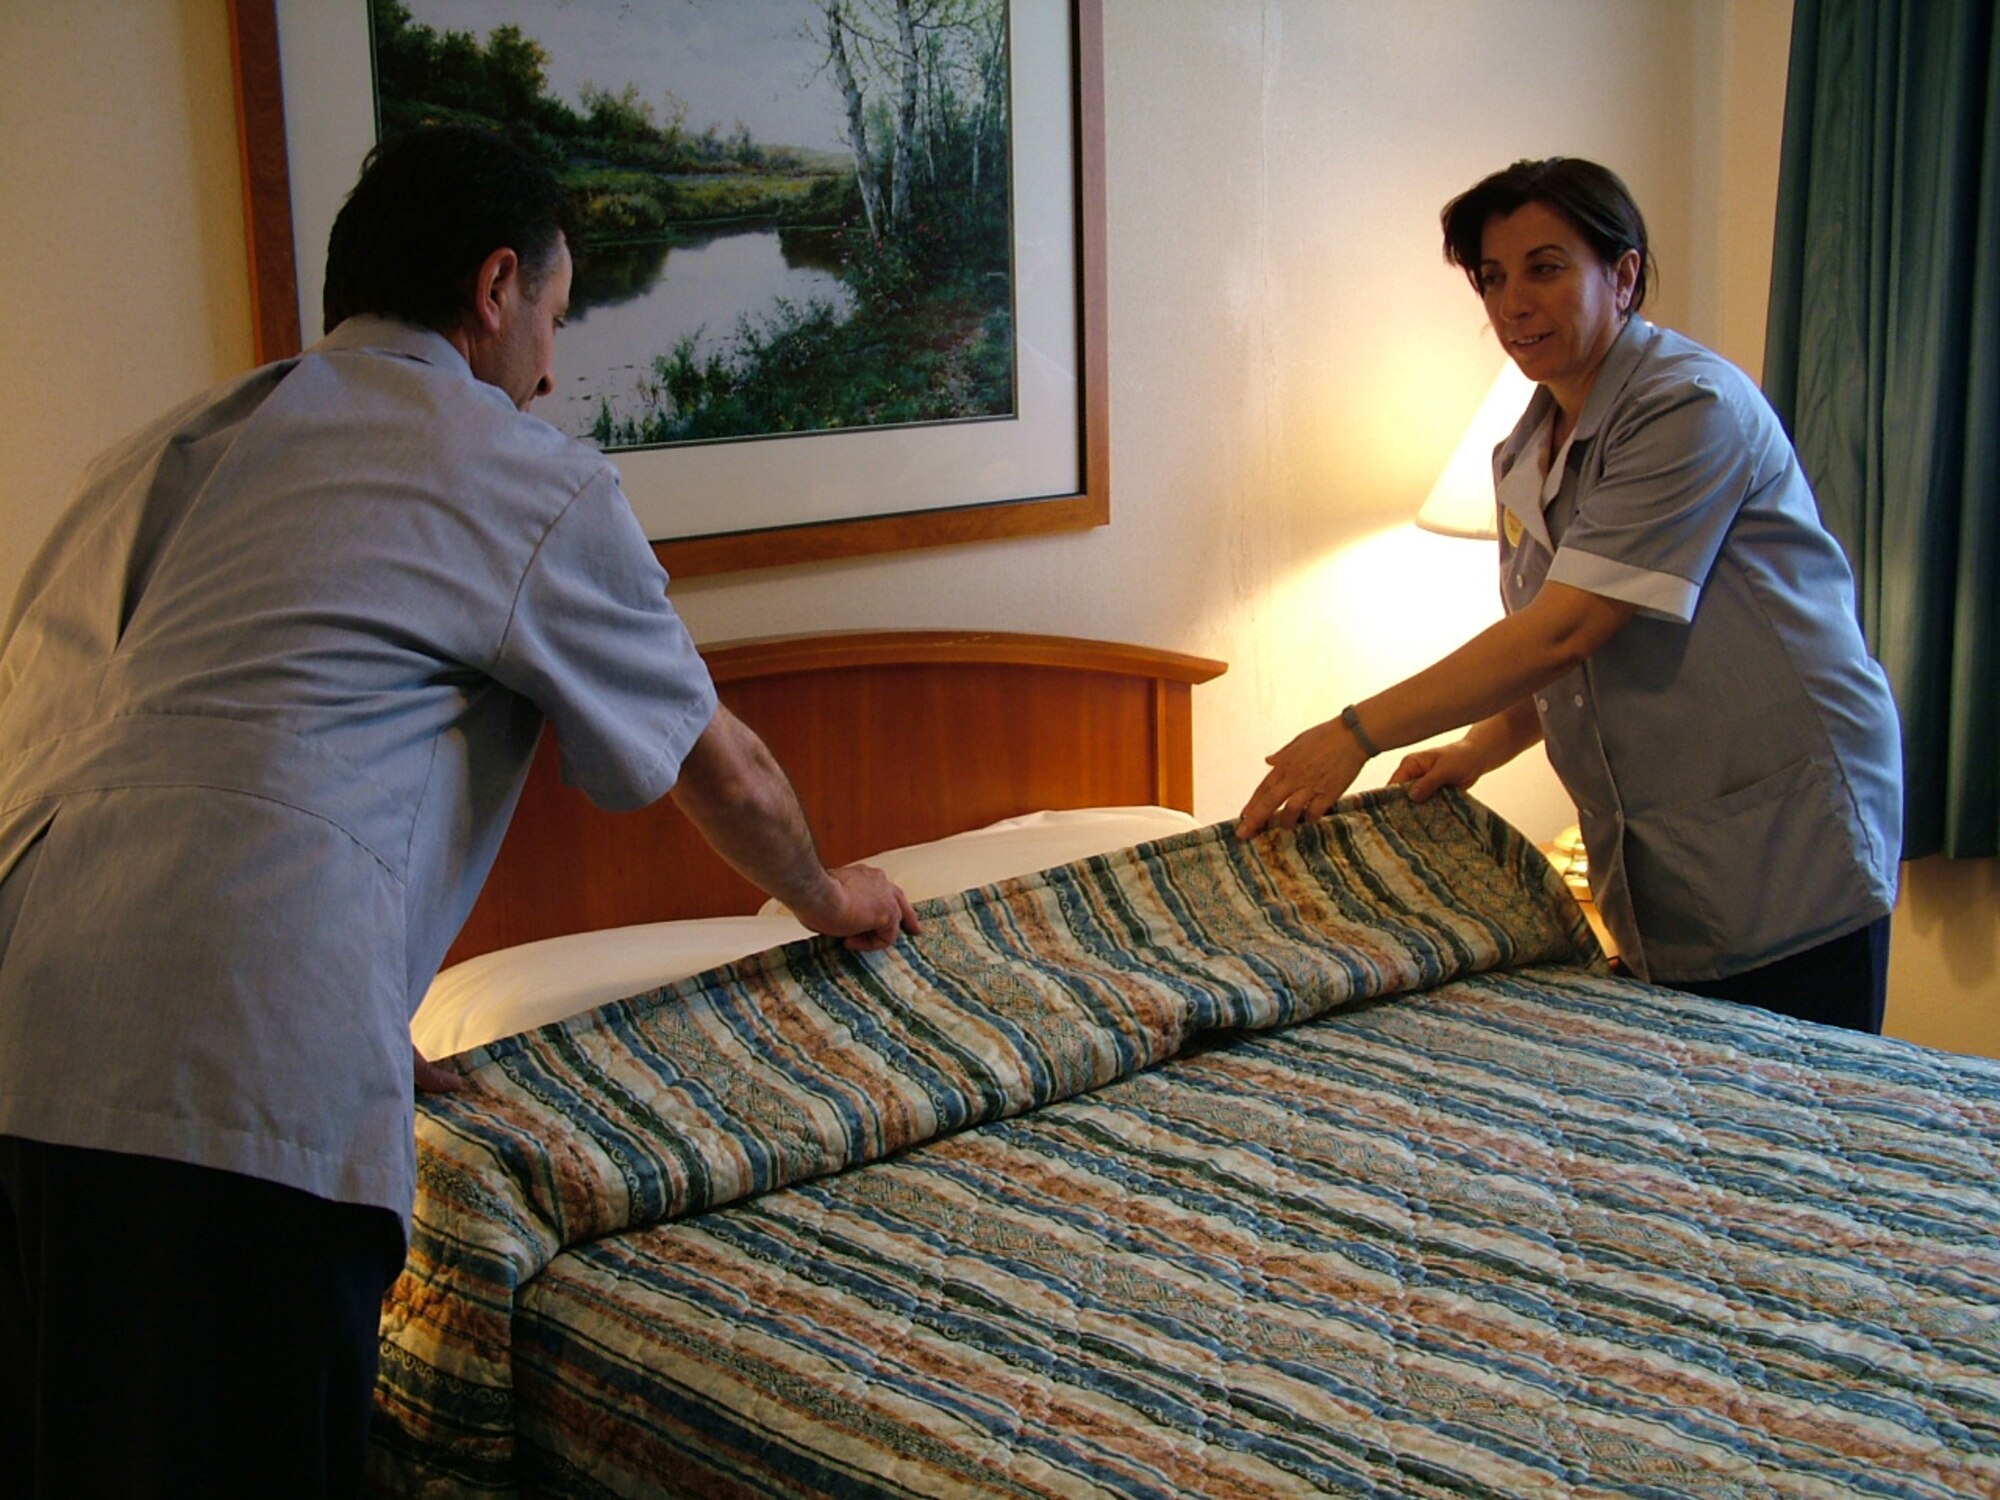 Two housekeepers make a bed at the Hodja Inn. The Hodja Inn was the winner of the 2006 Innkeeper Award. (Courtesy photo)